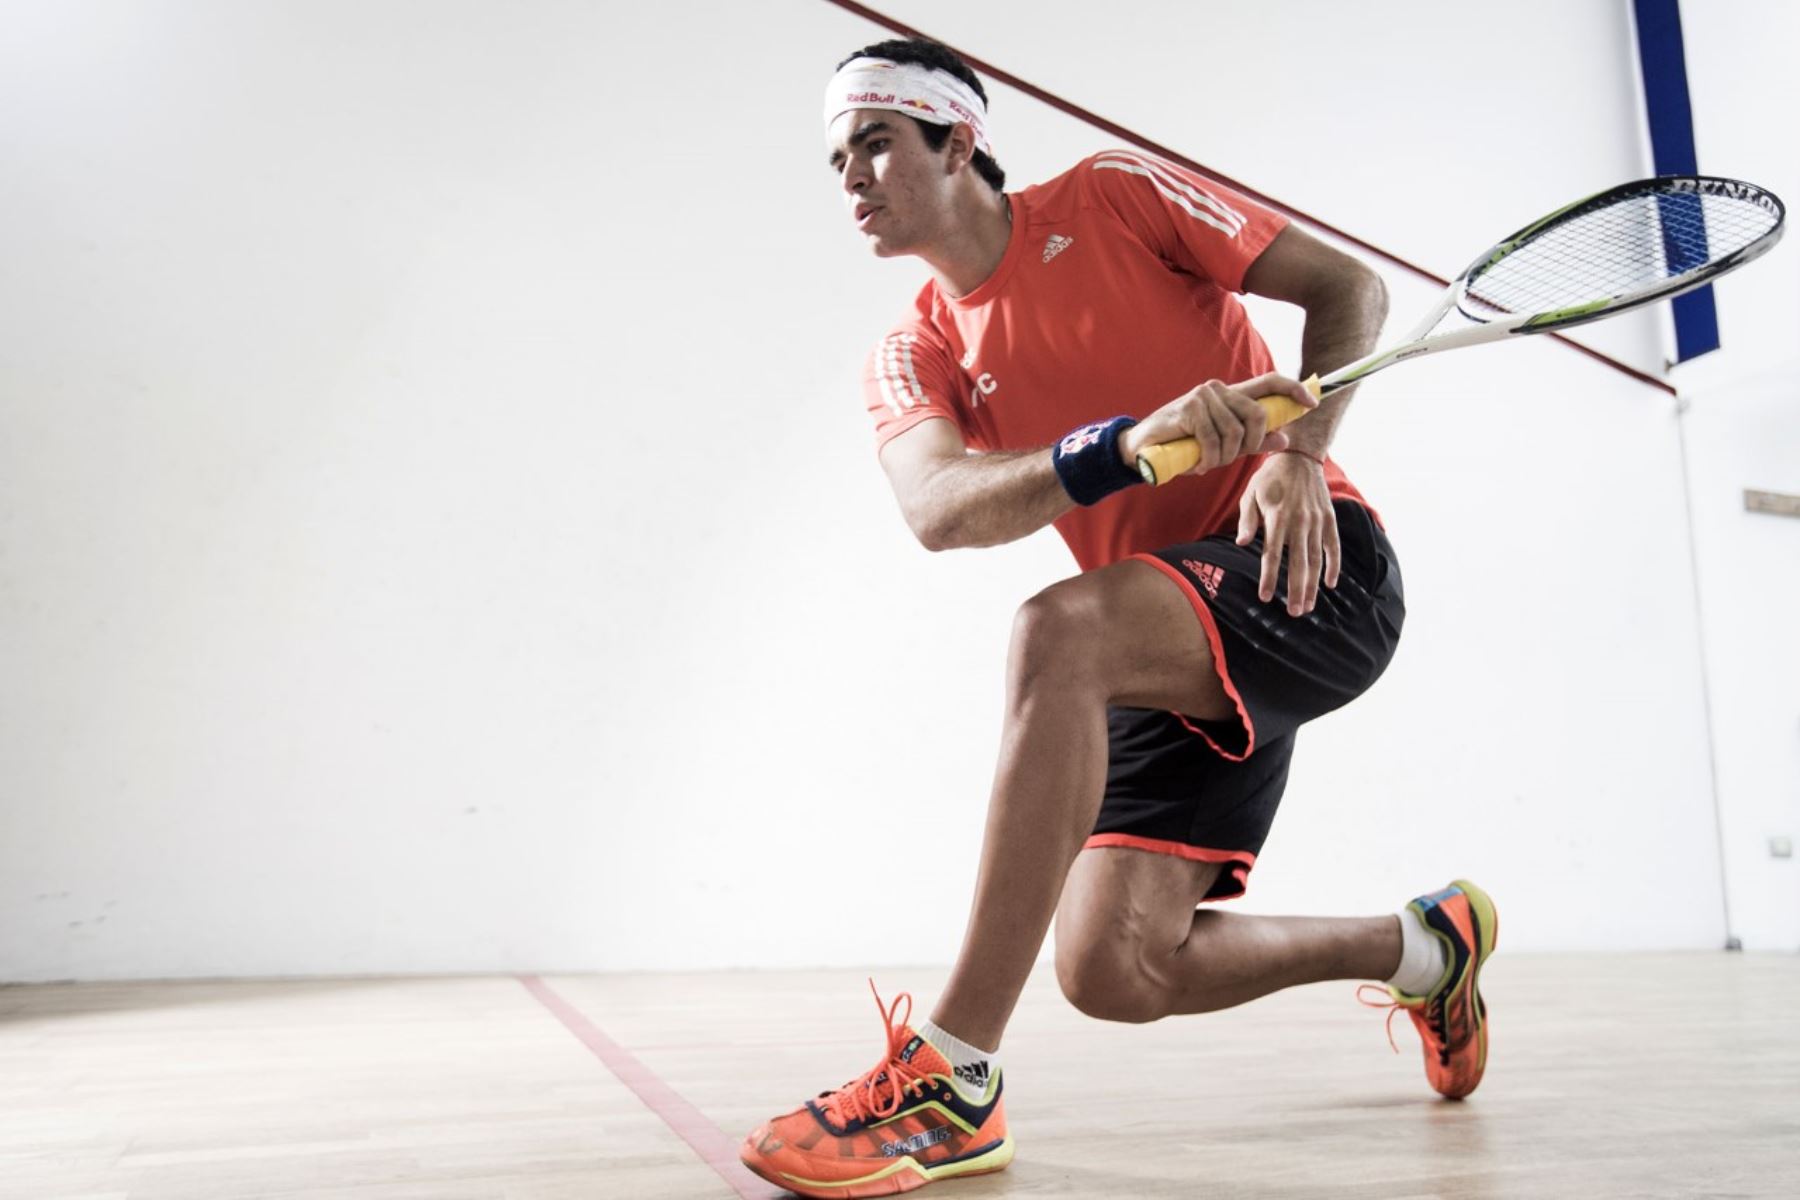 Elias becomes first South American world number one squash player